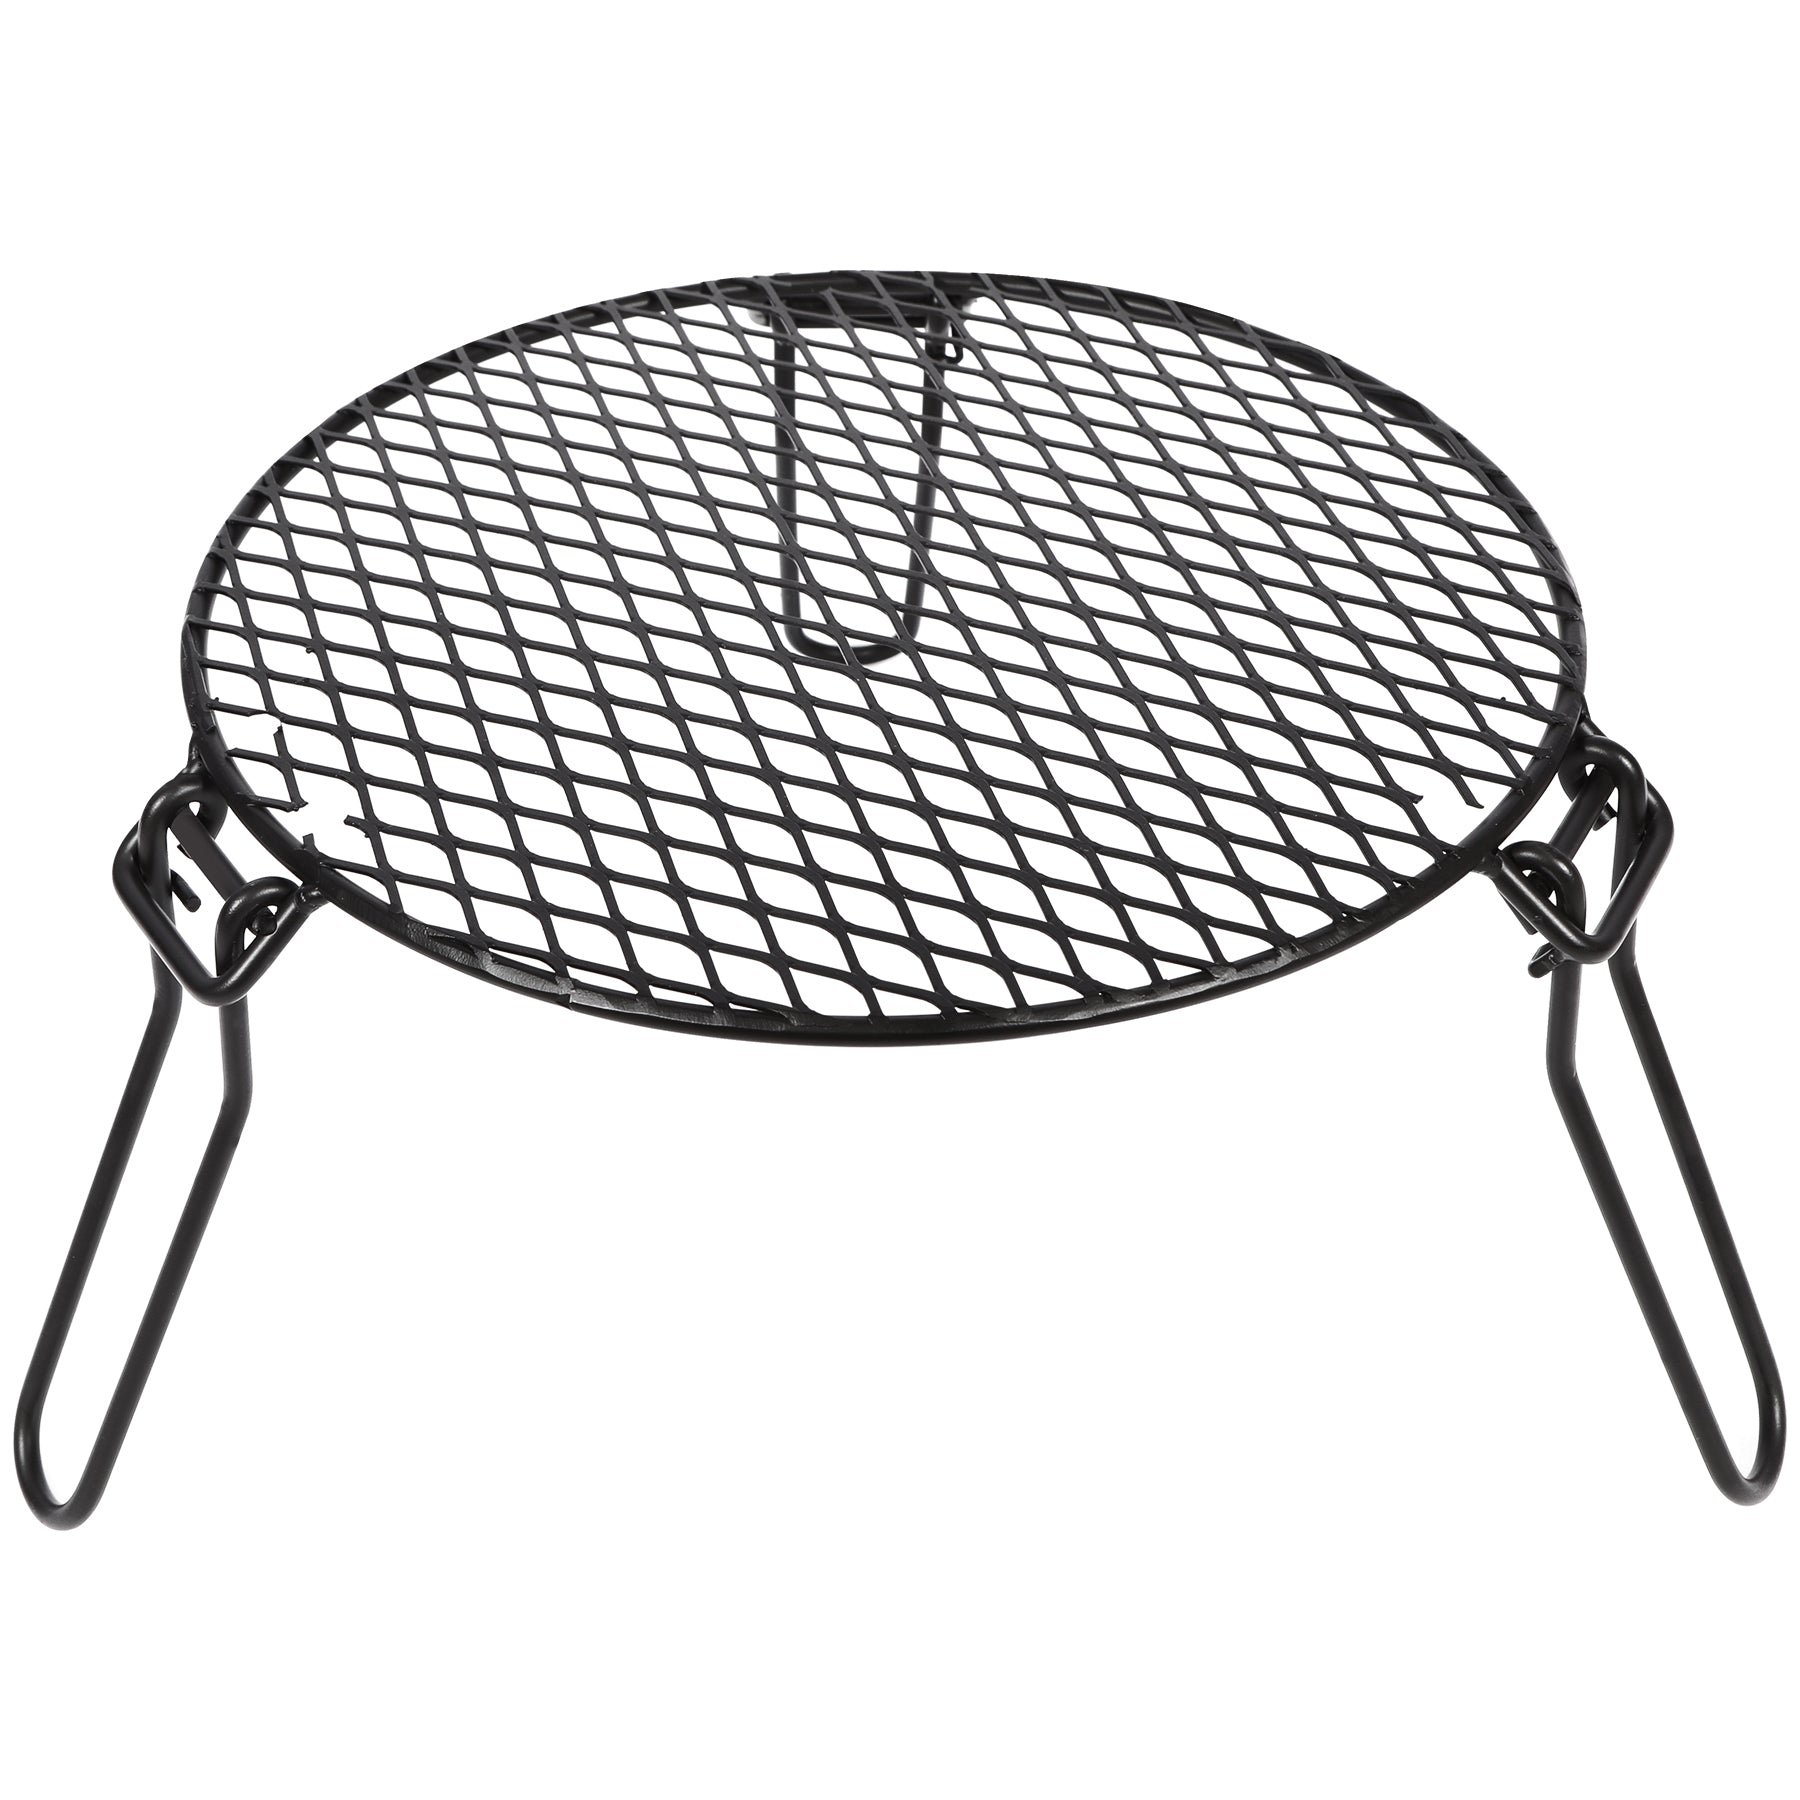 Folding Round Campfire Grill Grate, Portable Over Fire Camp Grill with Foldable Legs, 12”